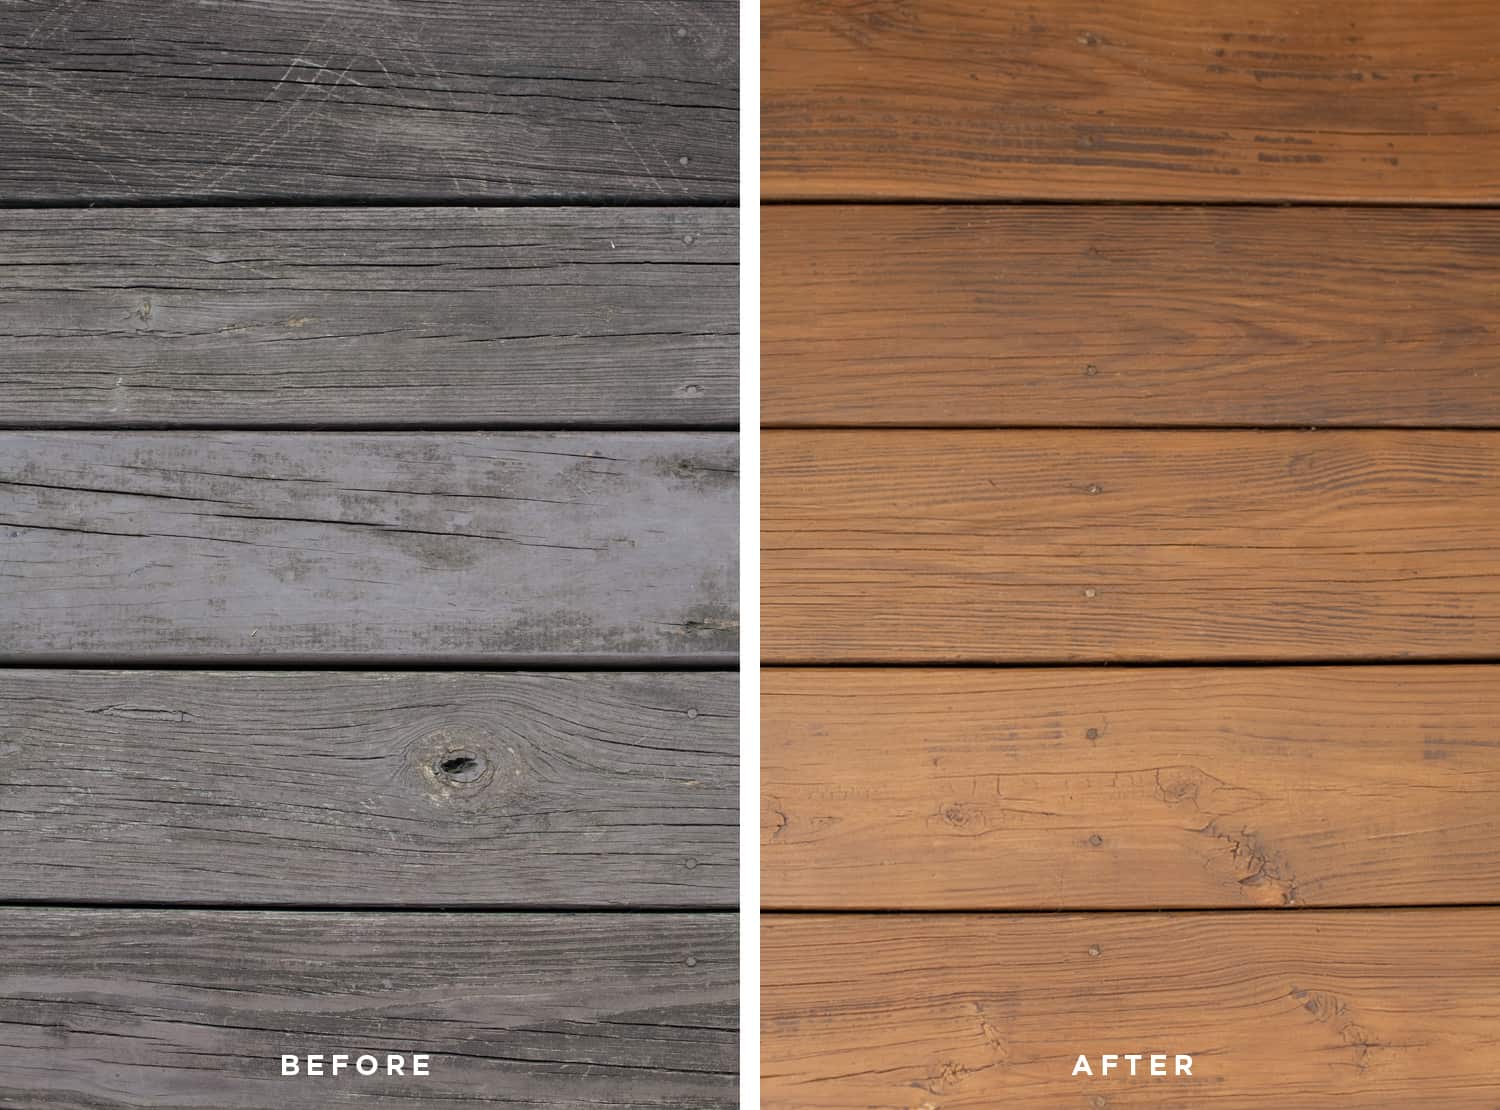 Before + After Deck refinishing